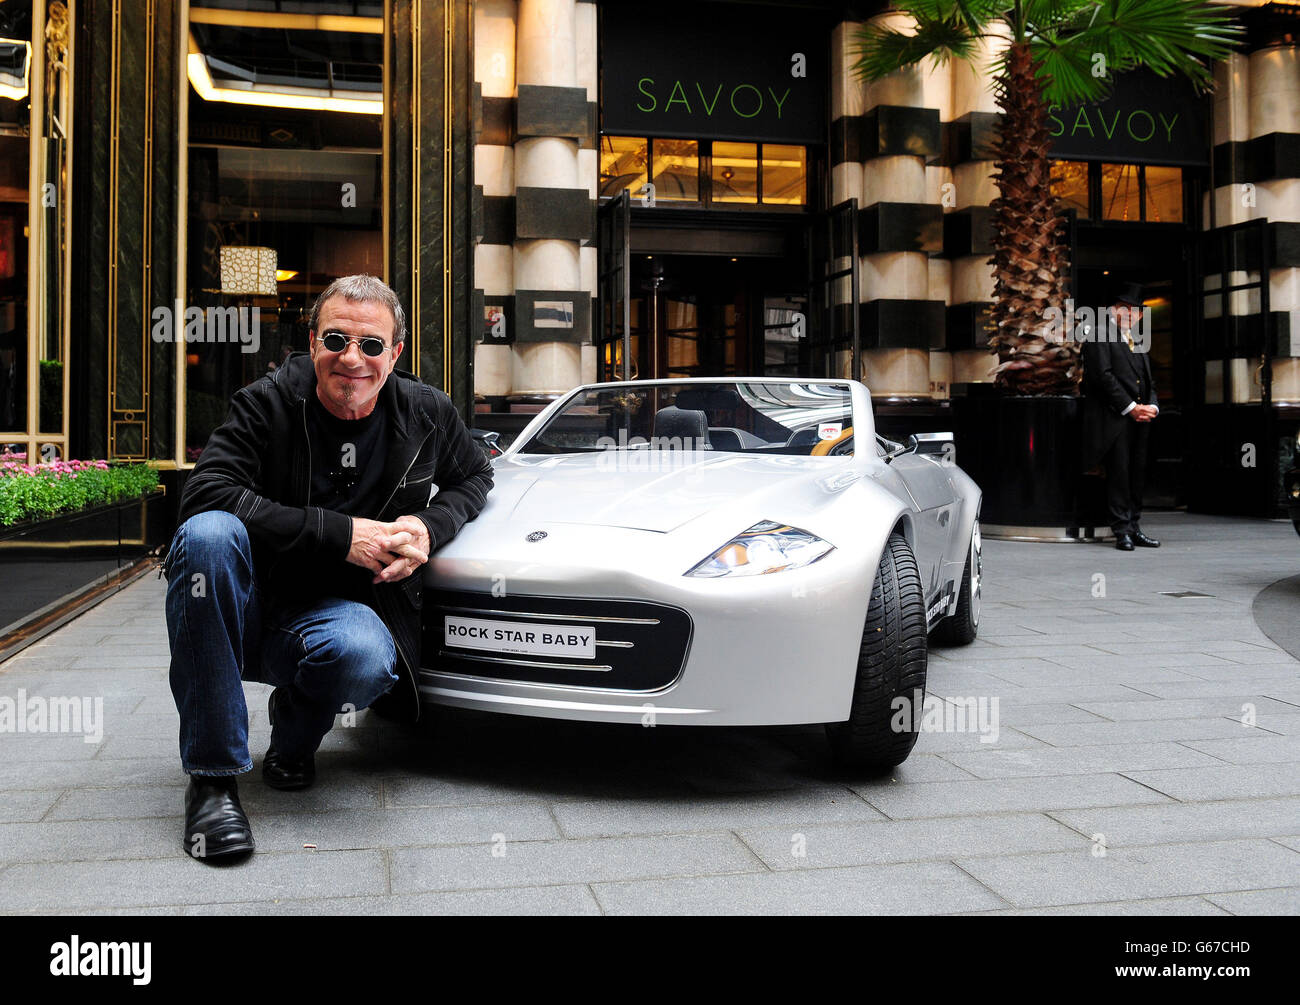 Tico Torres launches the latest collection of his children's clothing and accessory Rock Star Baby brand, including a £19,500 electric car, at the Savoy Hotel in London. Stock Photo